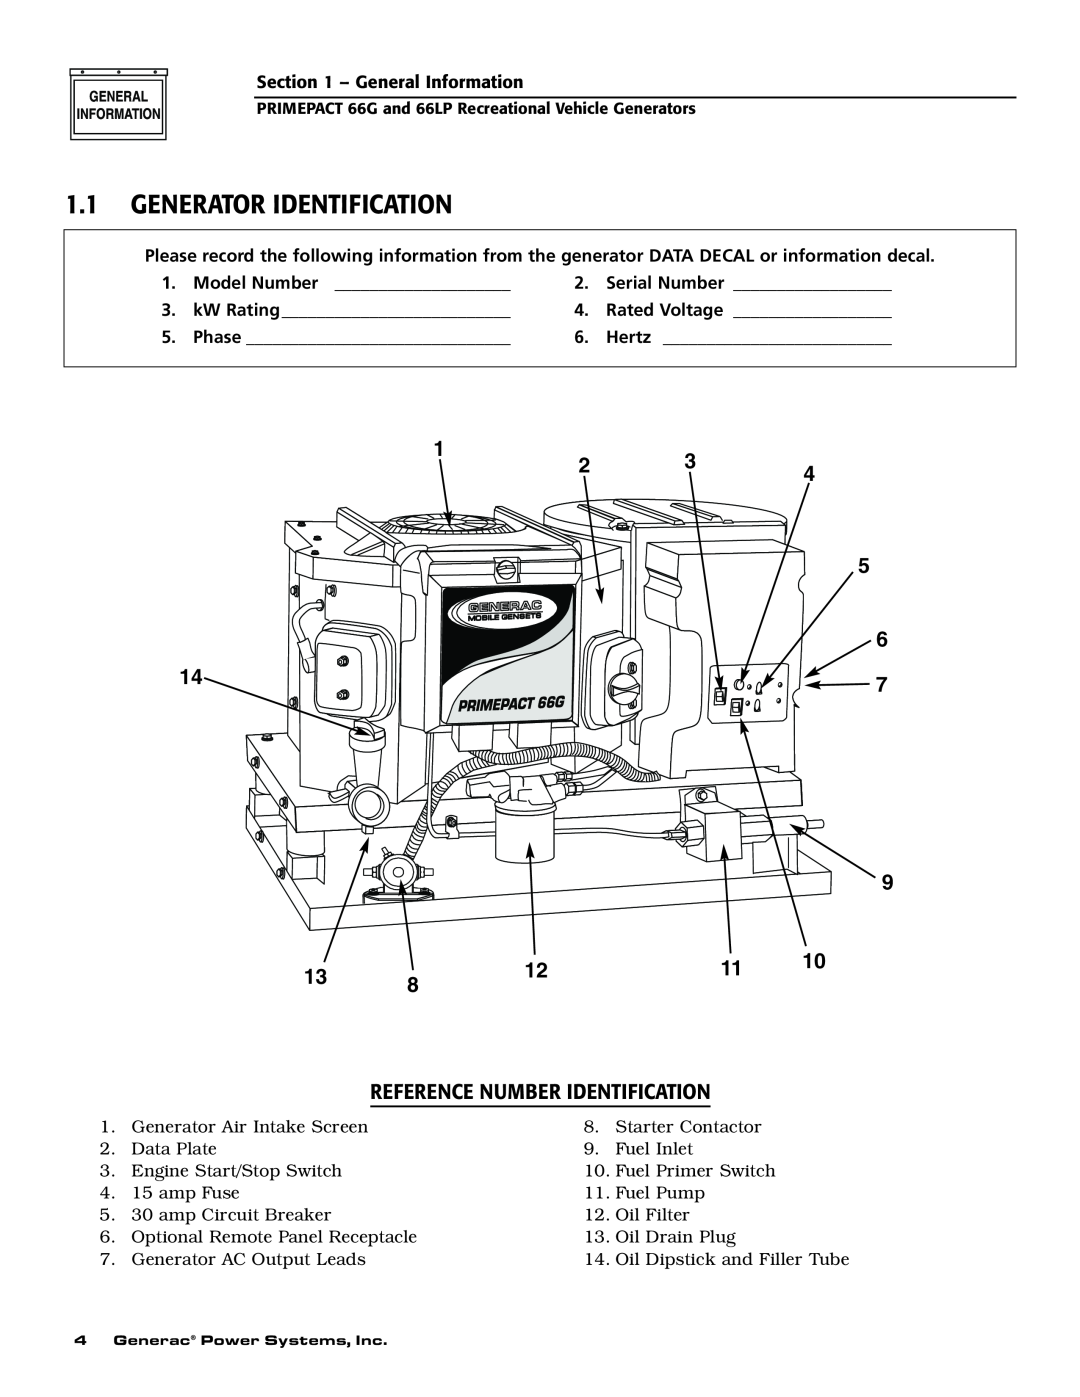 Generac Power Systems 009600-5, 009734-5 owner manual 1.1GENERATOR IDENTIFICATION, 1 2 3, Reference Number Identification 